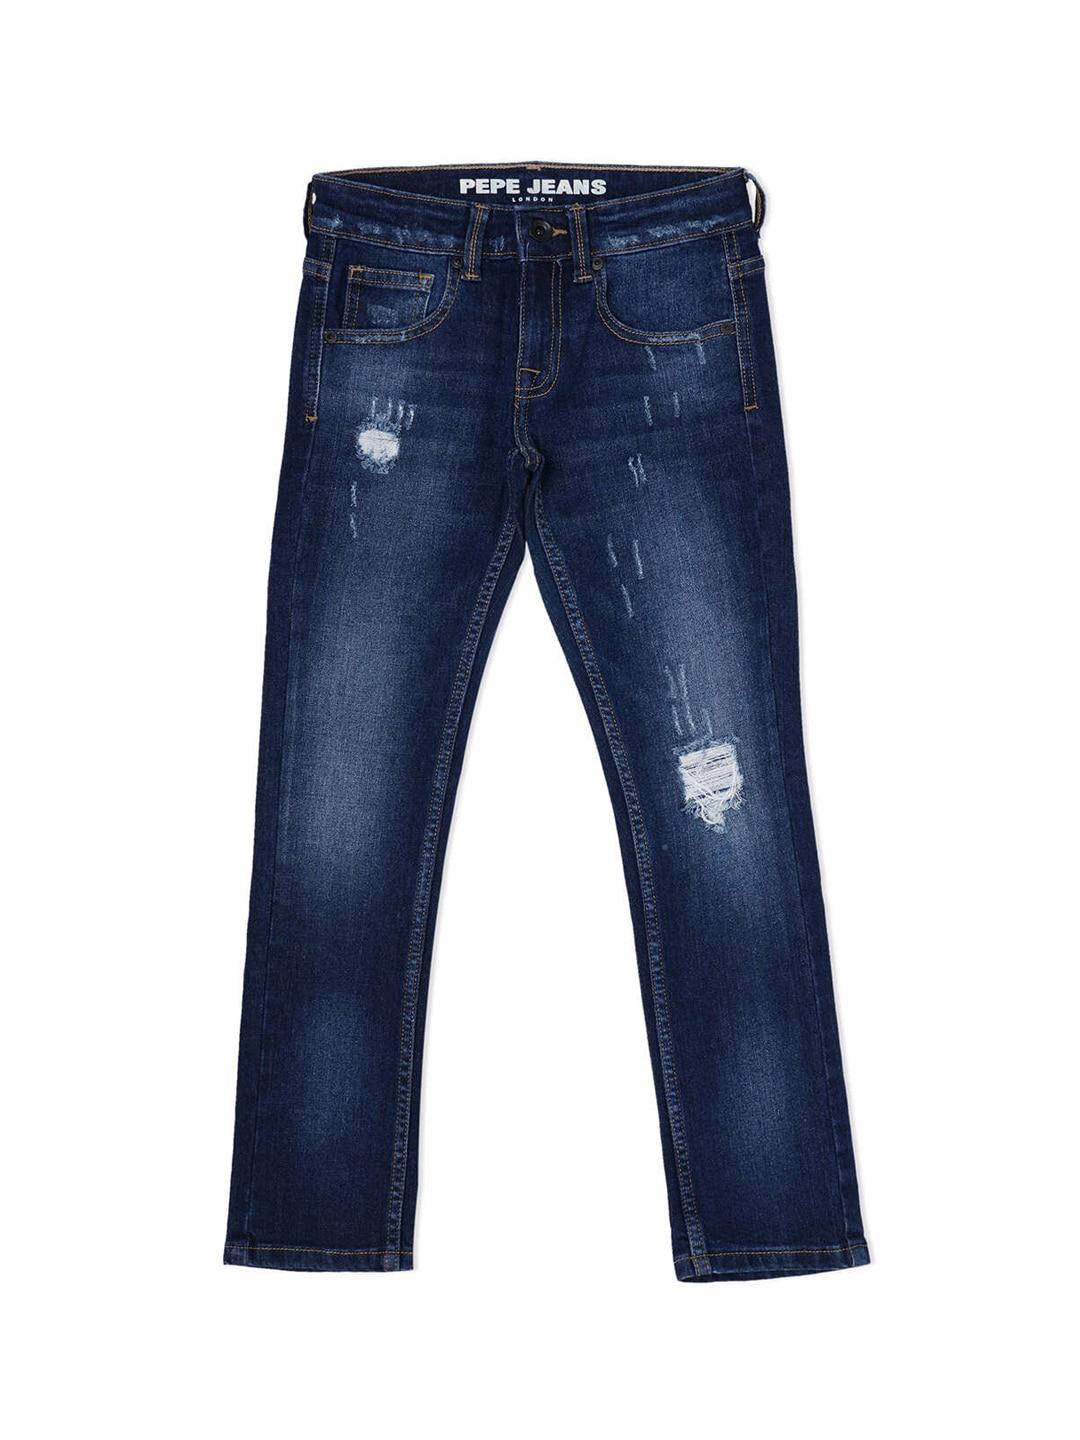 pepe jeans boys slim fit mildly distressed light fade stretchable jeans